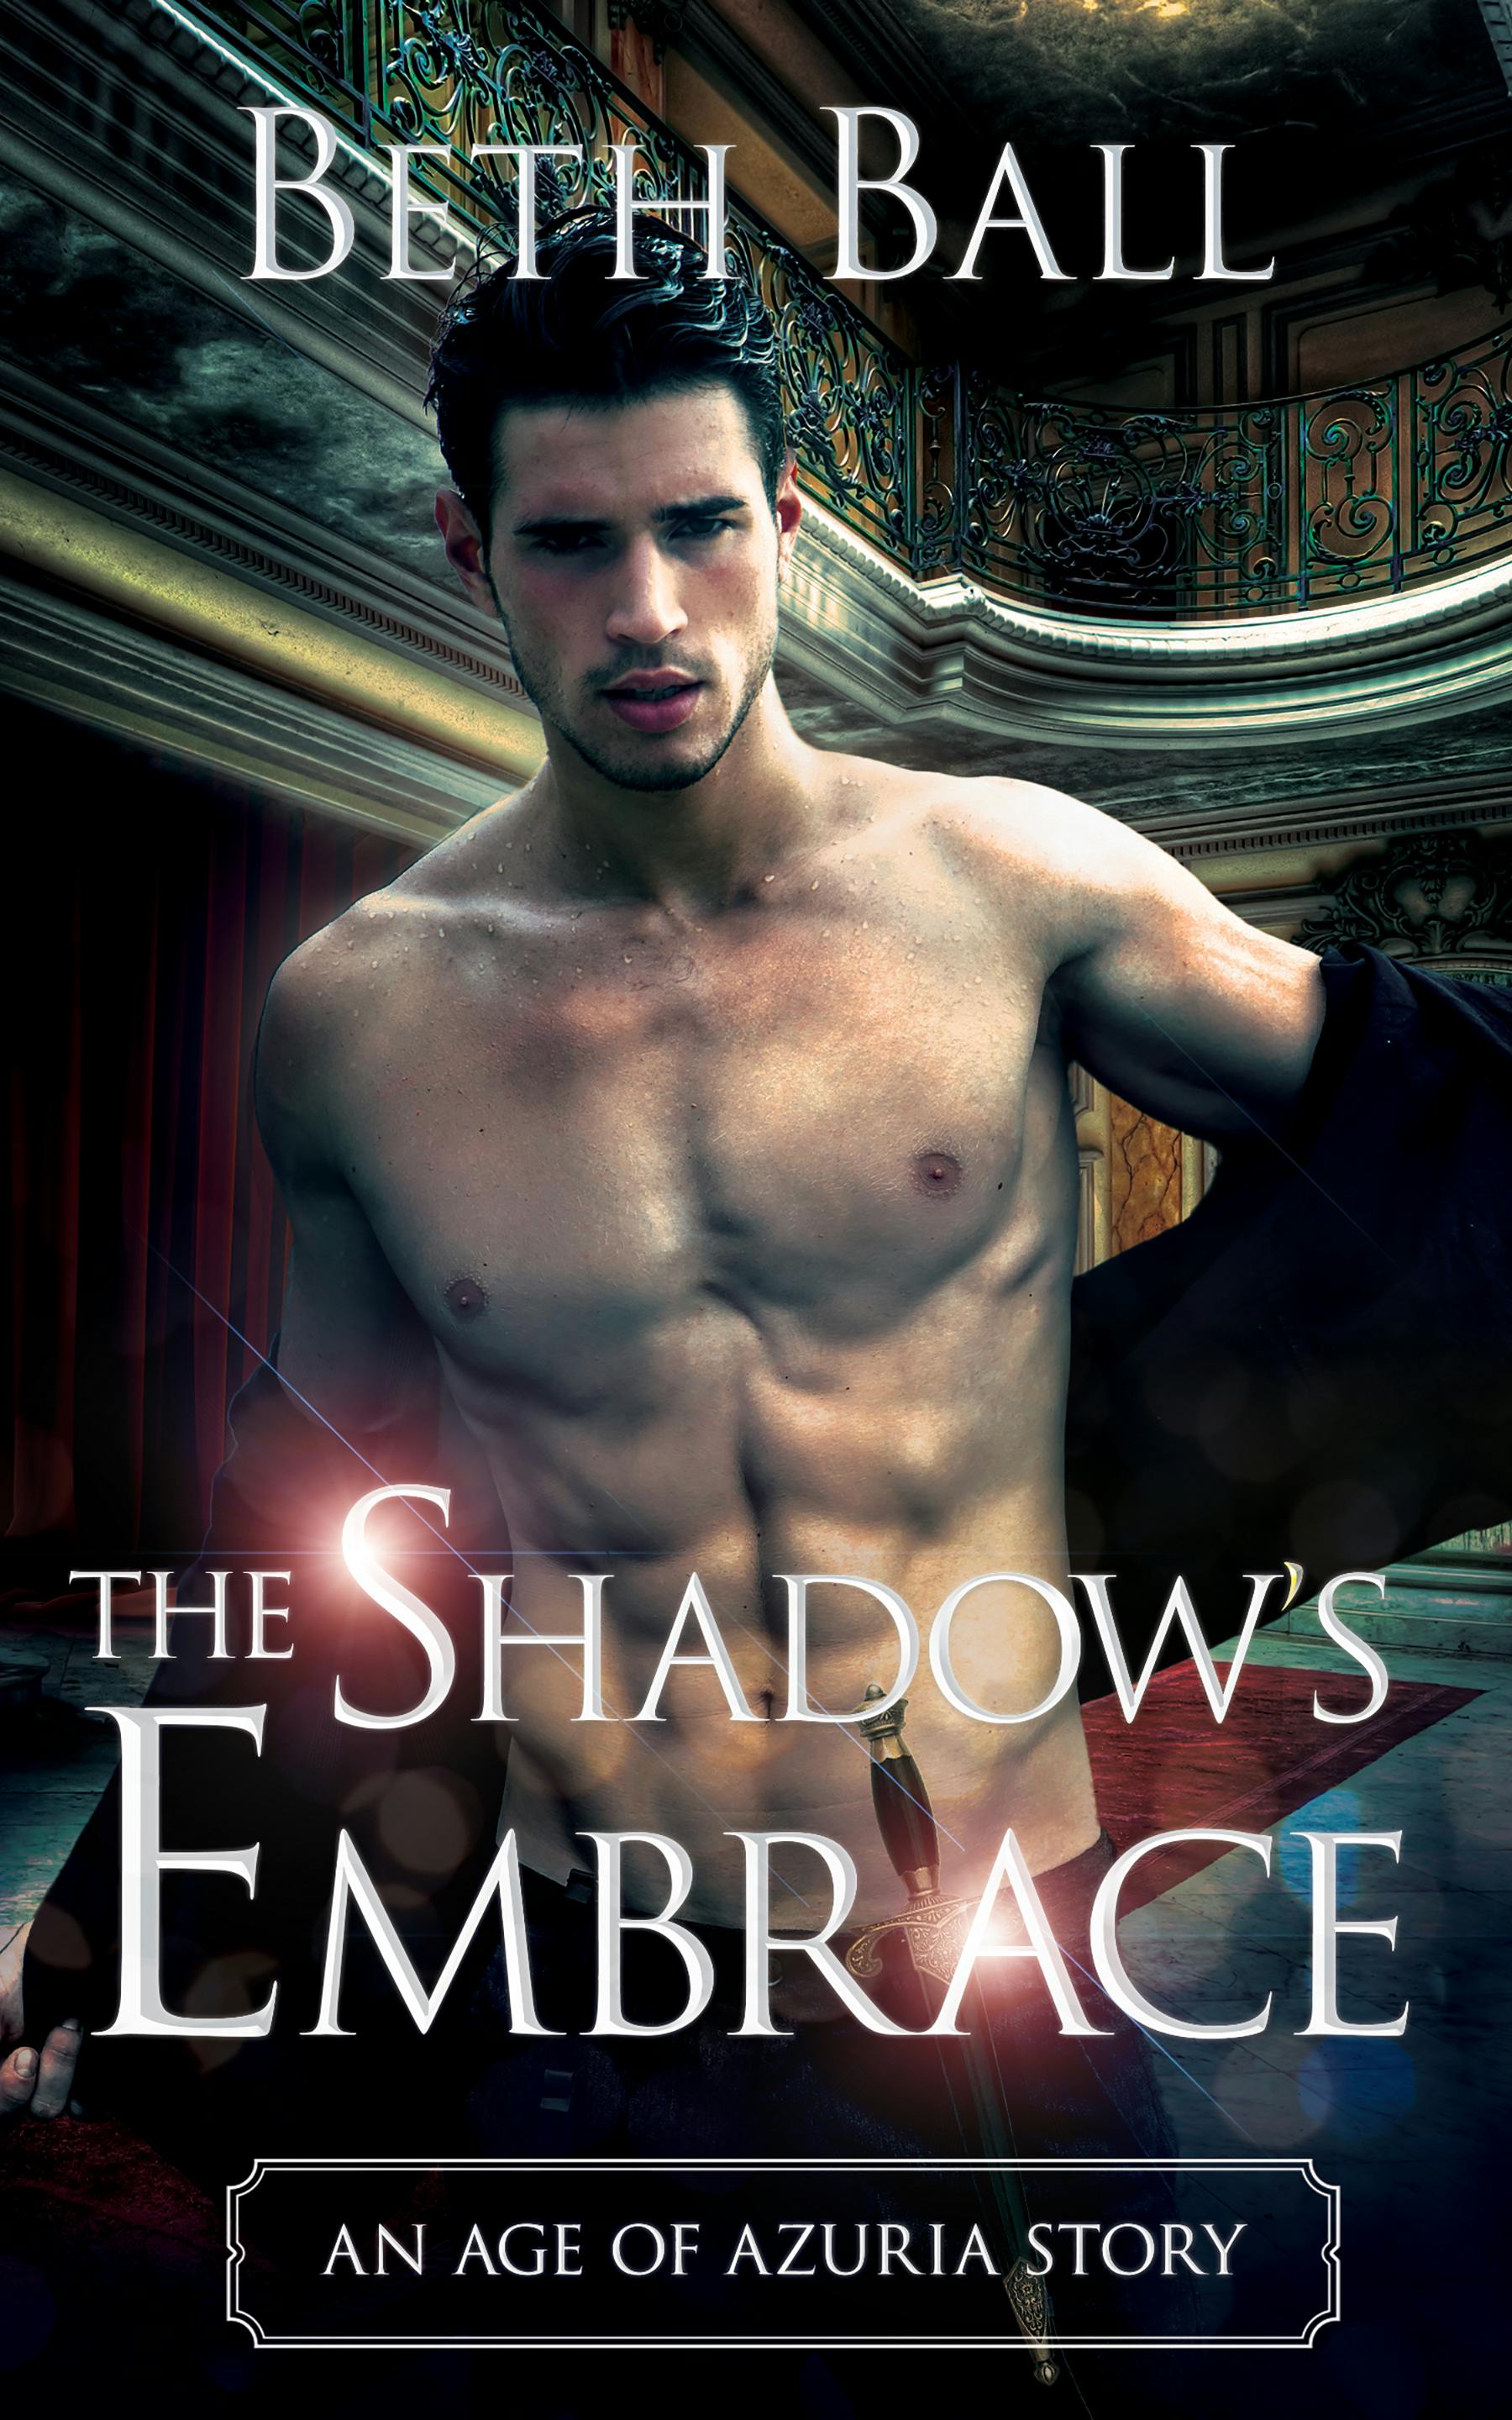 picture of a fantasy book cover showing a shirtless man with text overlay that reads The Shadow's Embrace, an Age of Azuria story by Beth Ball